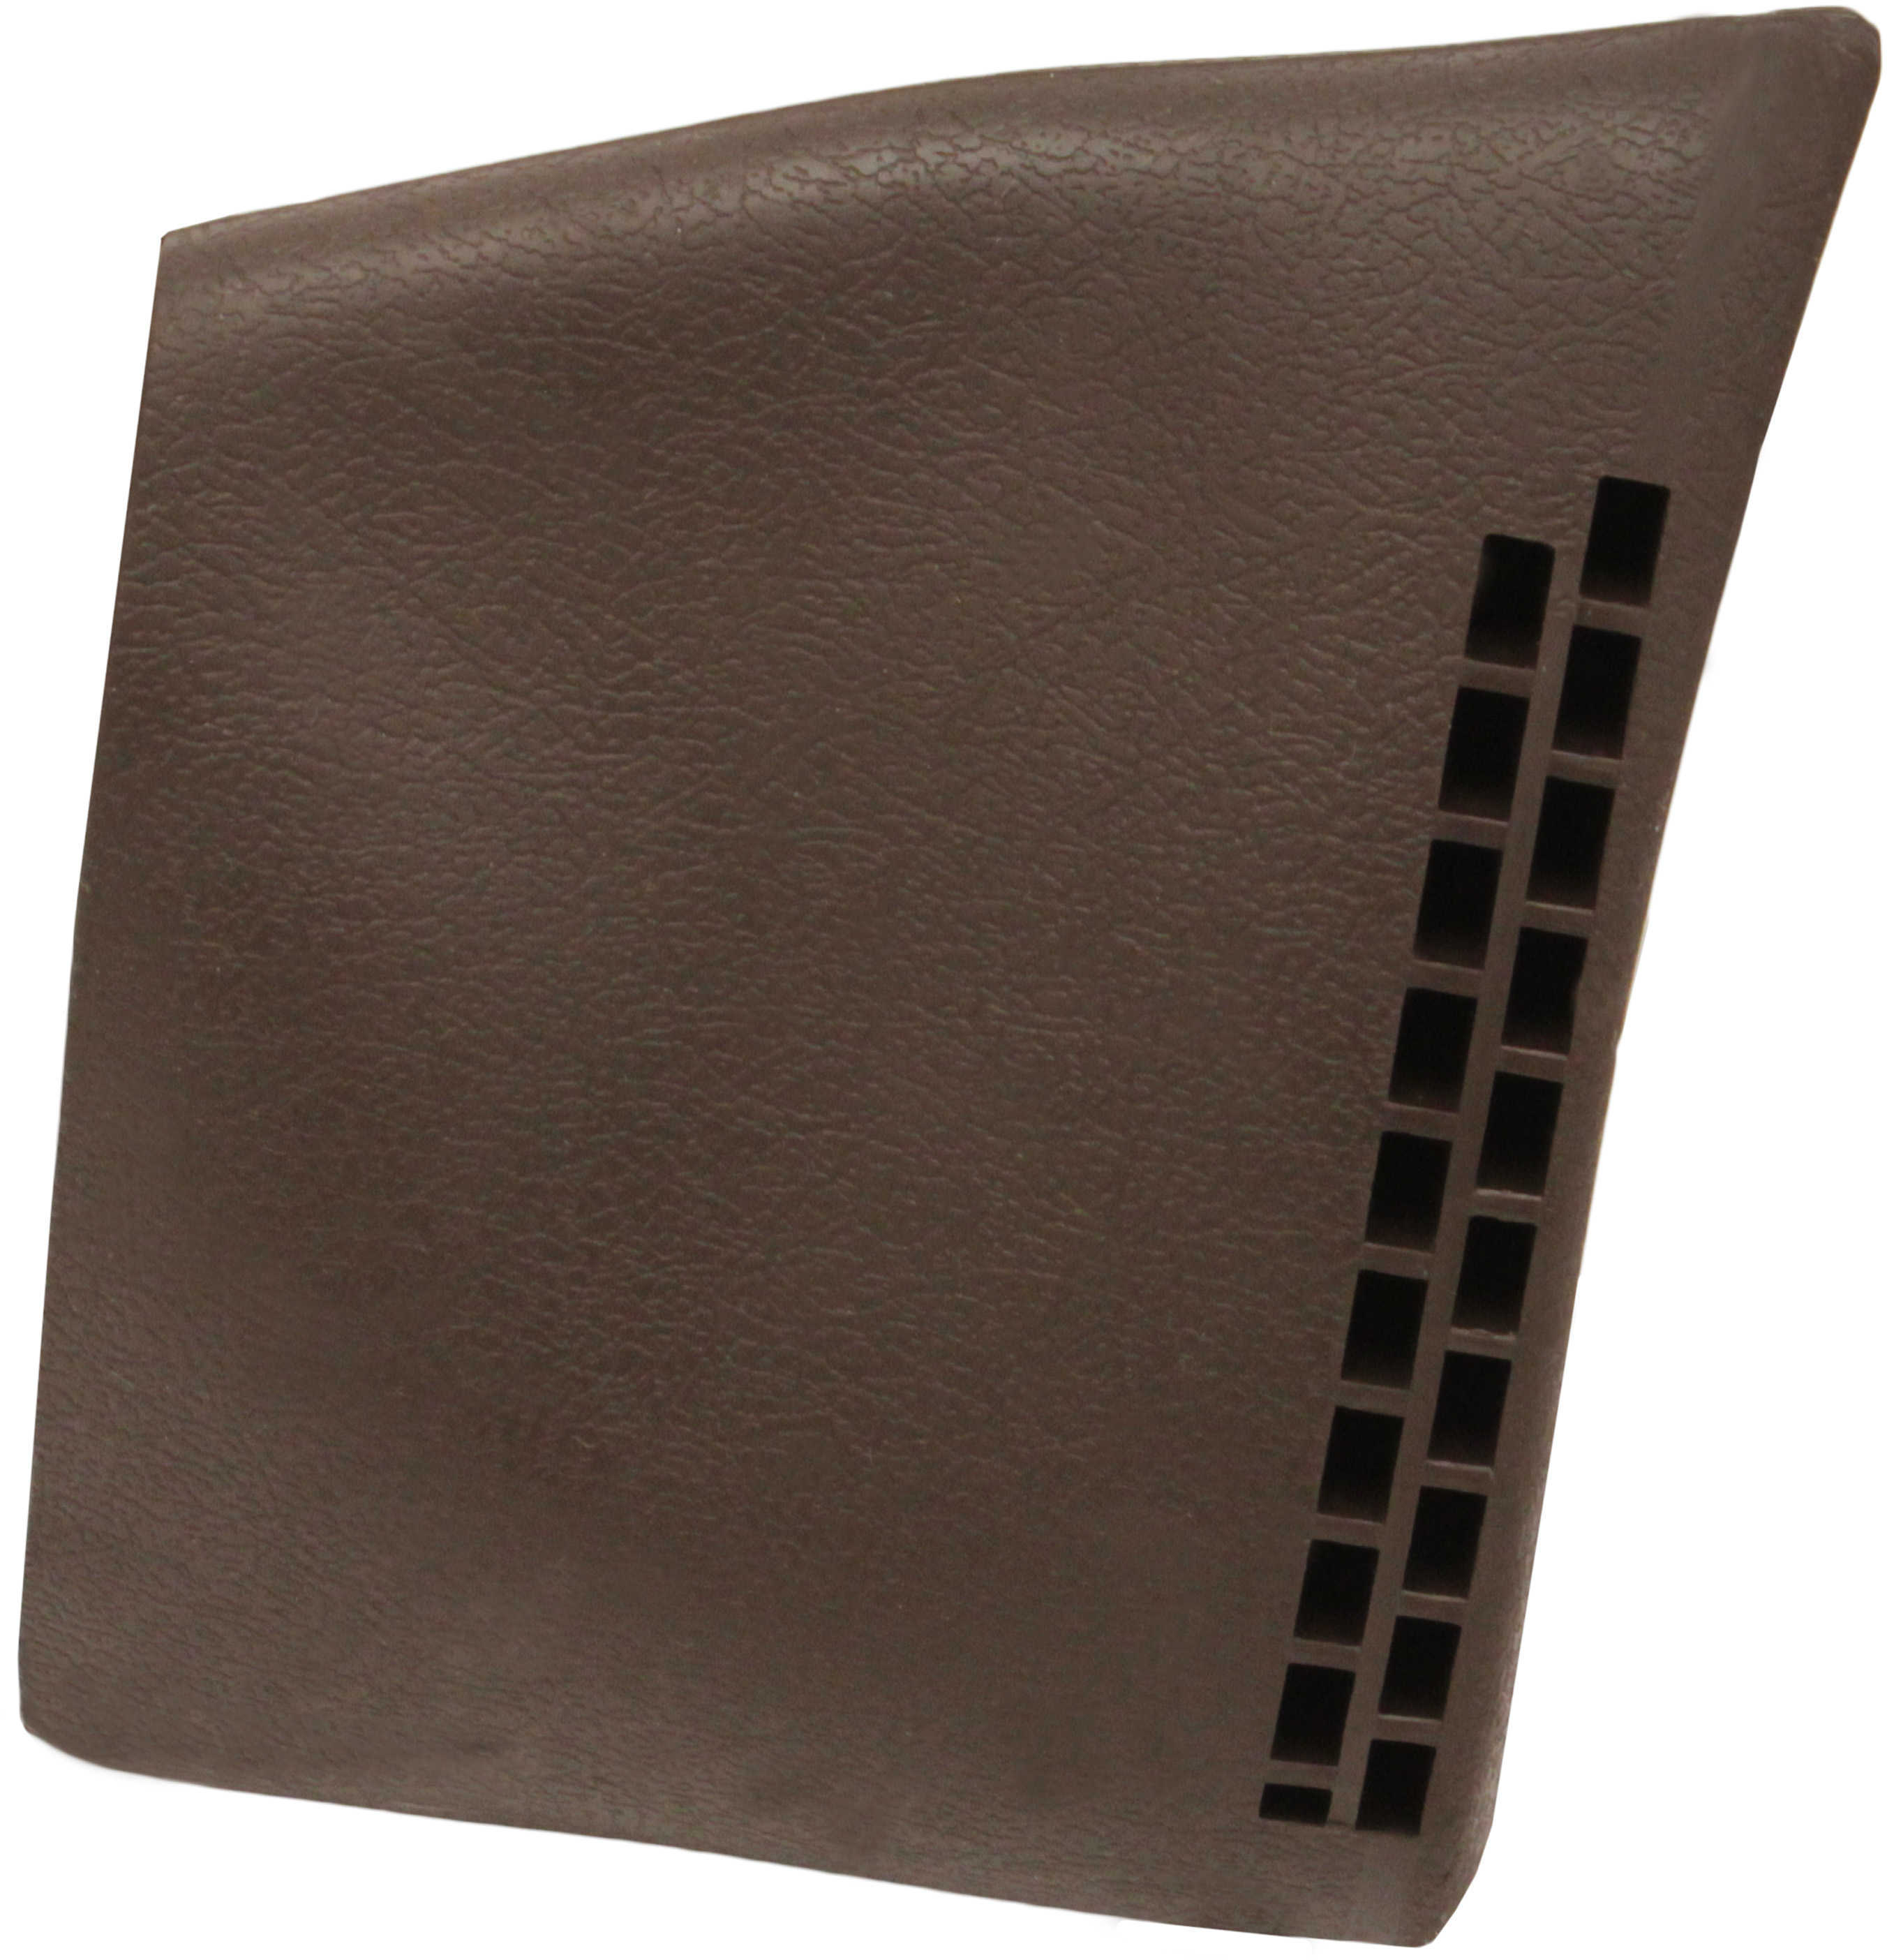 Butler Creek Small Slip-on ecoil Pad in Brown 5"H x 4"D x 1 1/2"W